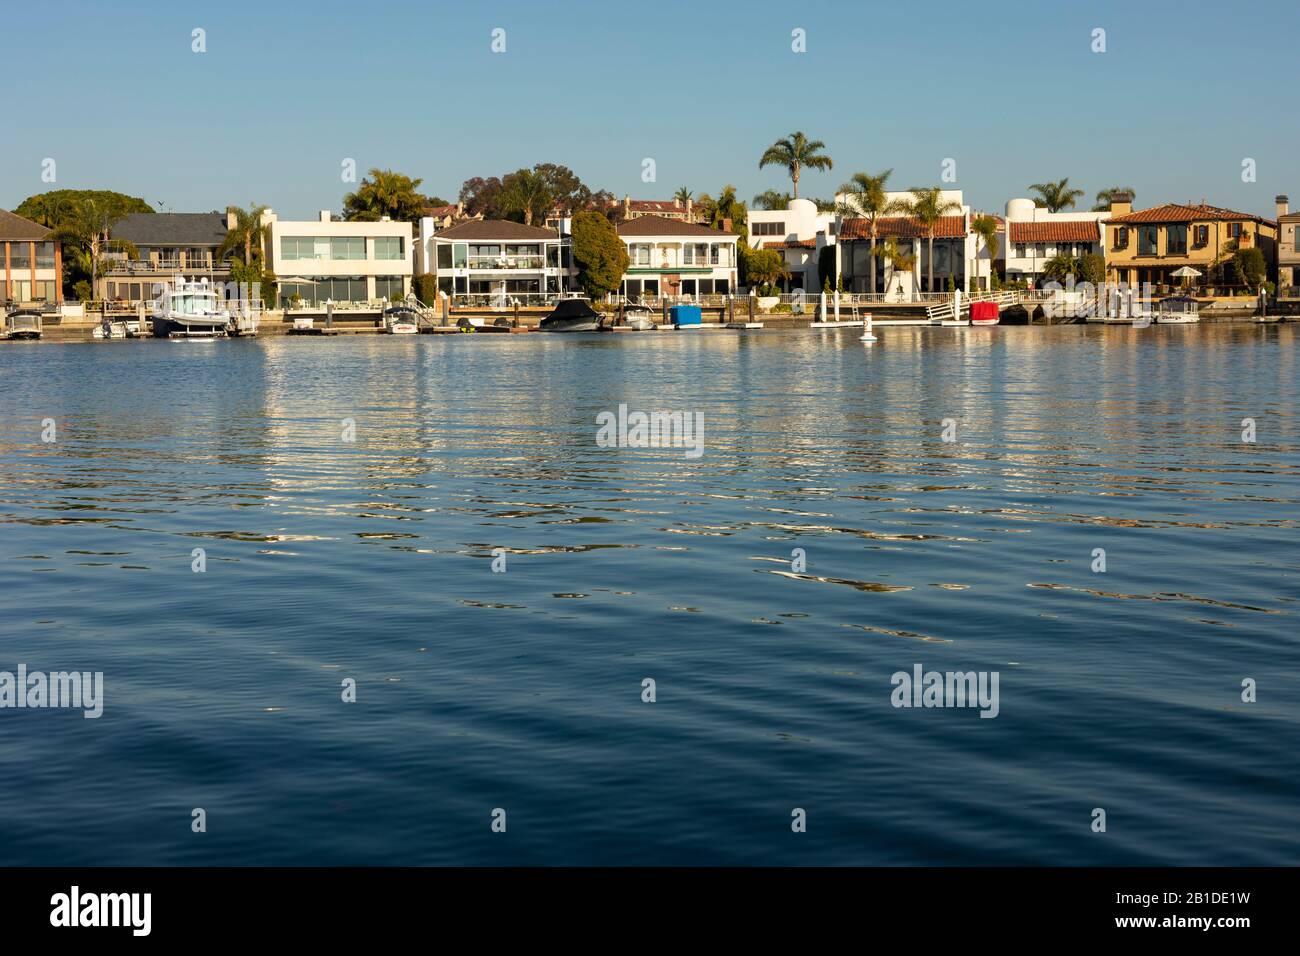 Mansion homes line the water in Newport Bay, Newport Beach, California, USA. Stock Photo